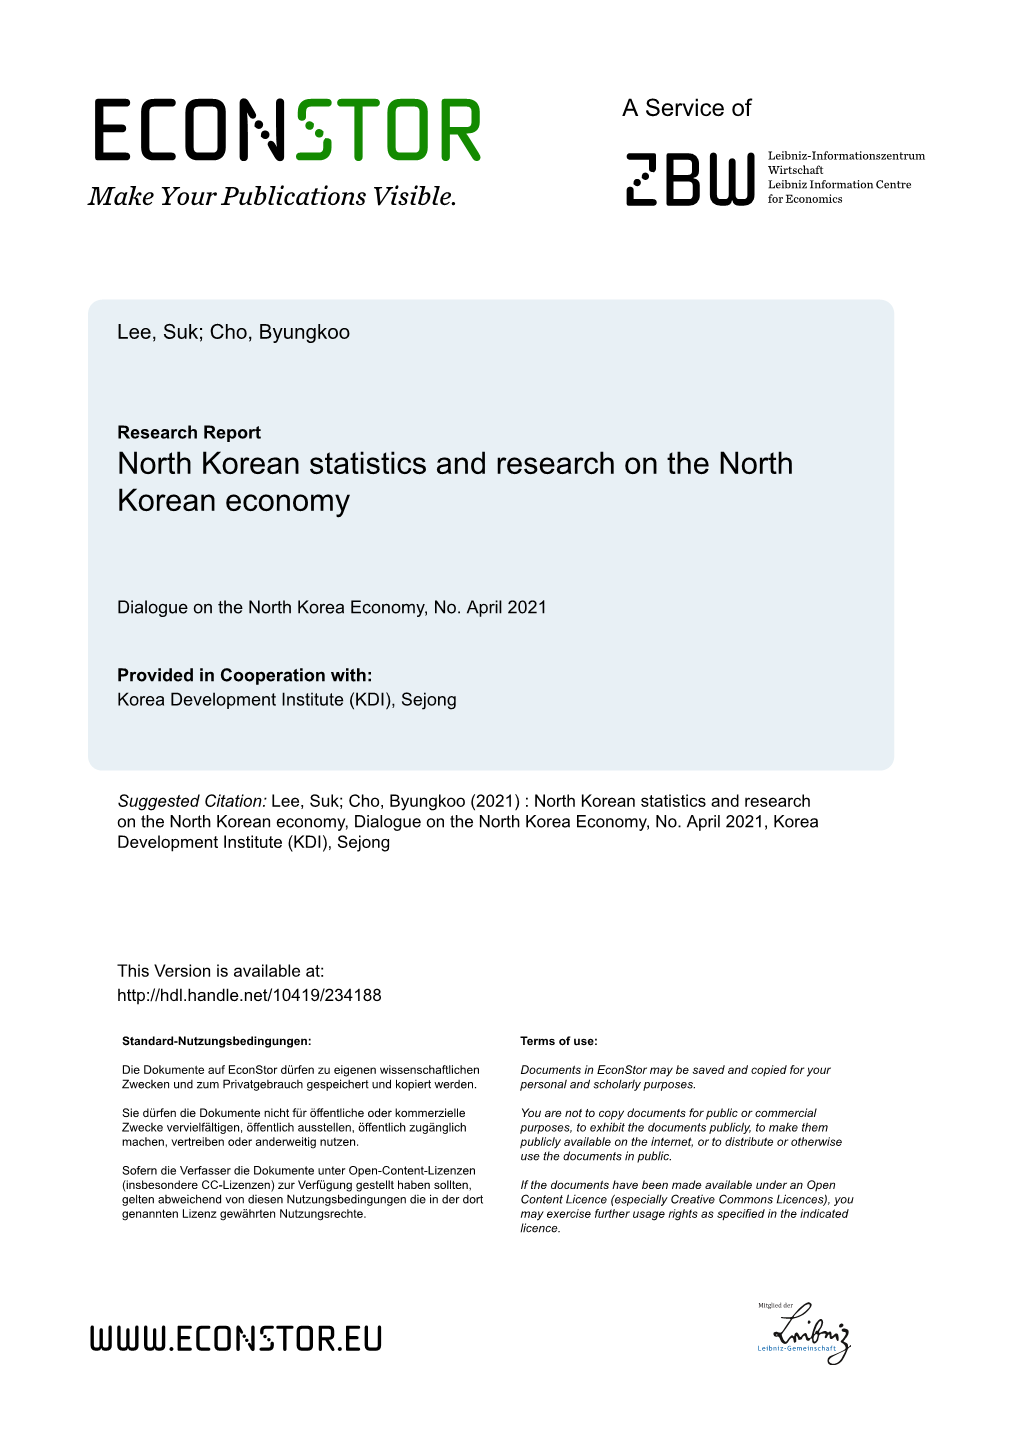 North Korean Statistics and Research on the North Korean Economy